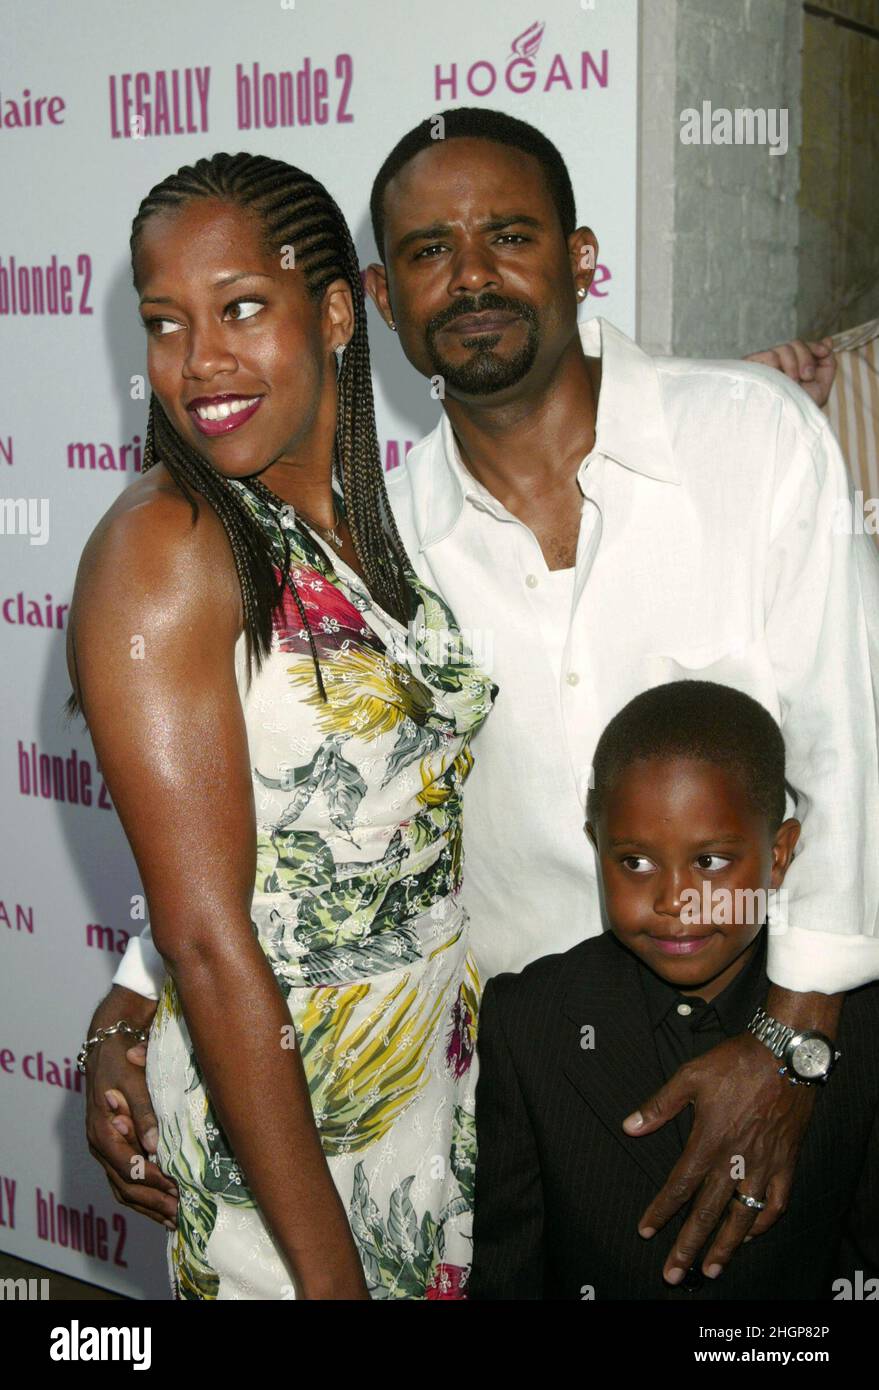 **FILE PHOTO** Regina King's Son Dies By Suicide. Regina King, husband Ian Alexander and son Ian Alexander Jr attend the premiere of 'Legally Blonde 2: Red White & Blonde' at United Artists Southampton Theater in Southampton, NY on June 28, 2003. Photo Credit: Henry McGee/MediaPunch Stock Photo